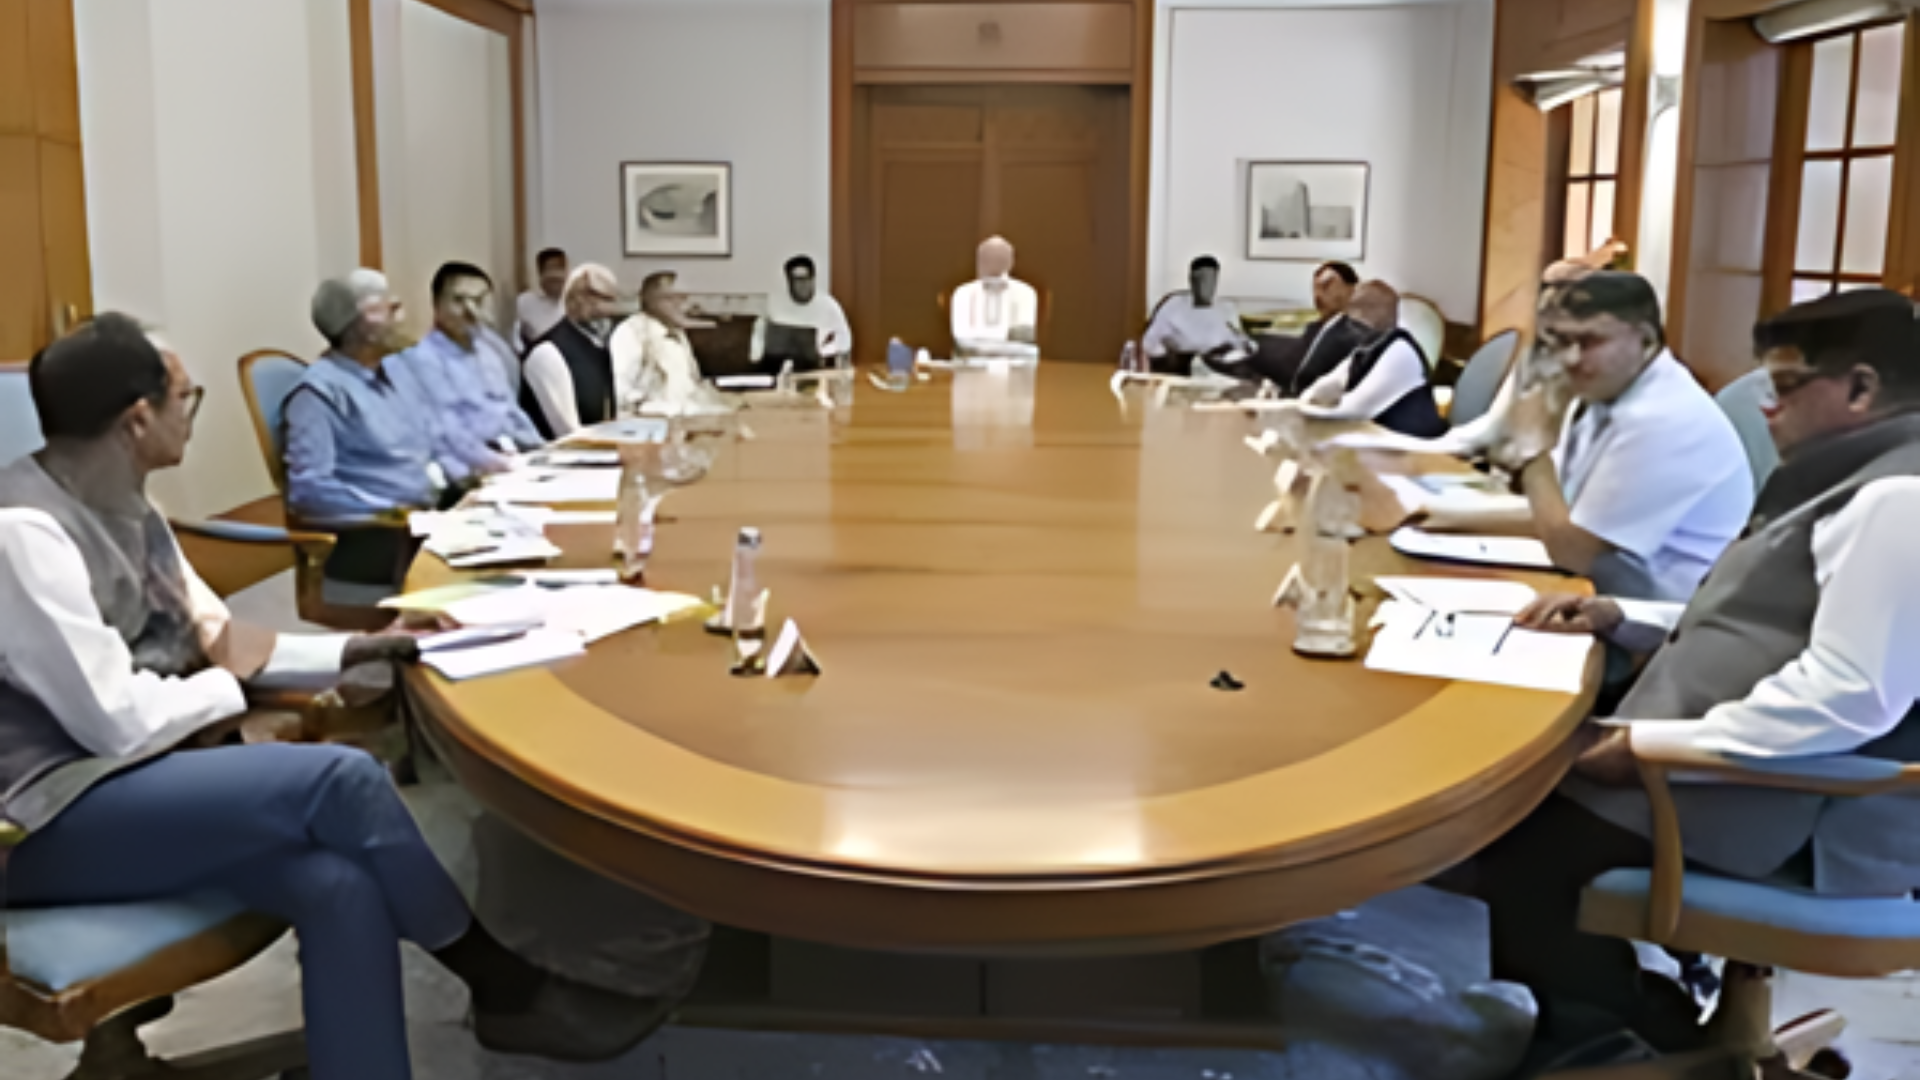 PM Modi Reviews Heatwave Situation and Monsoon Preparedness Amid Ongoing Crisis